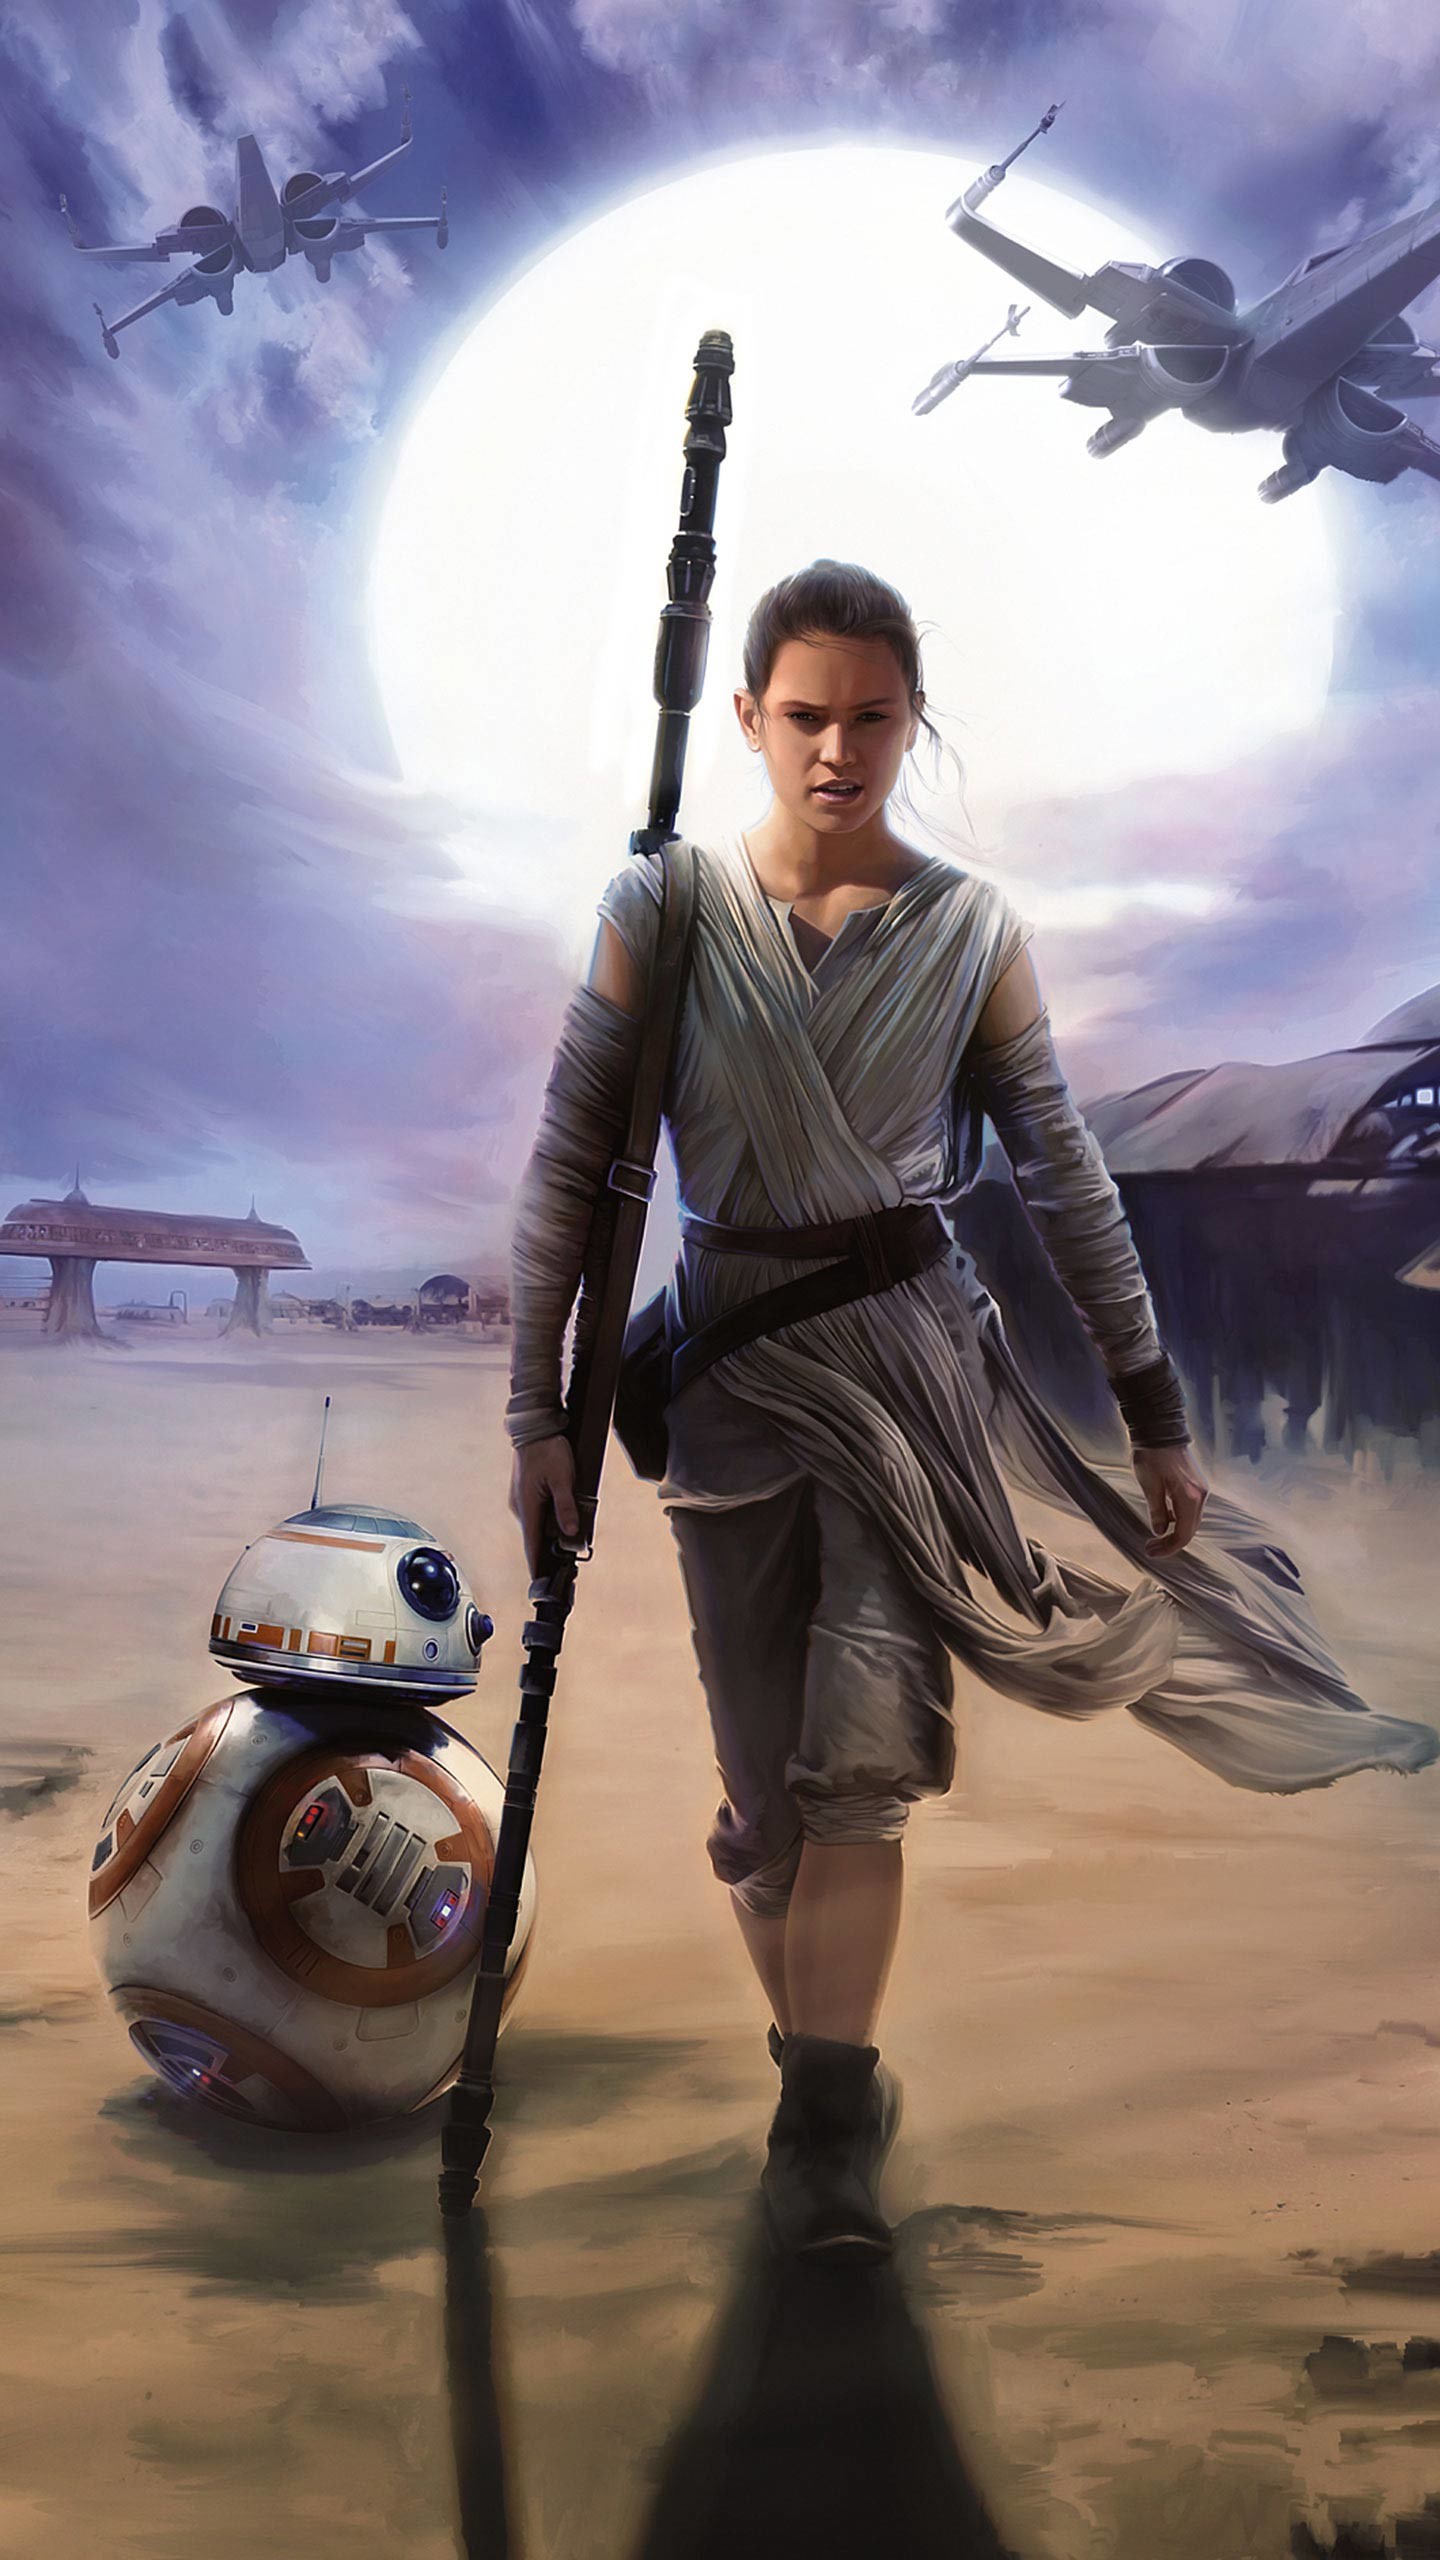 1440x2560 Star Wars The Force Awakens wallpapers for your iPhone s and 1440Ã2560